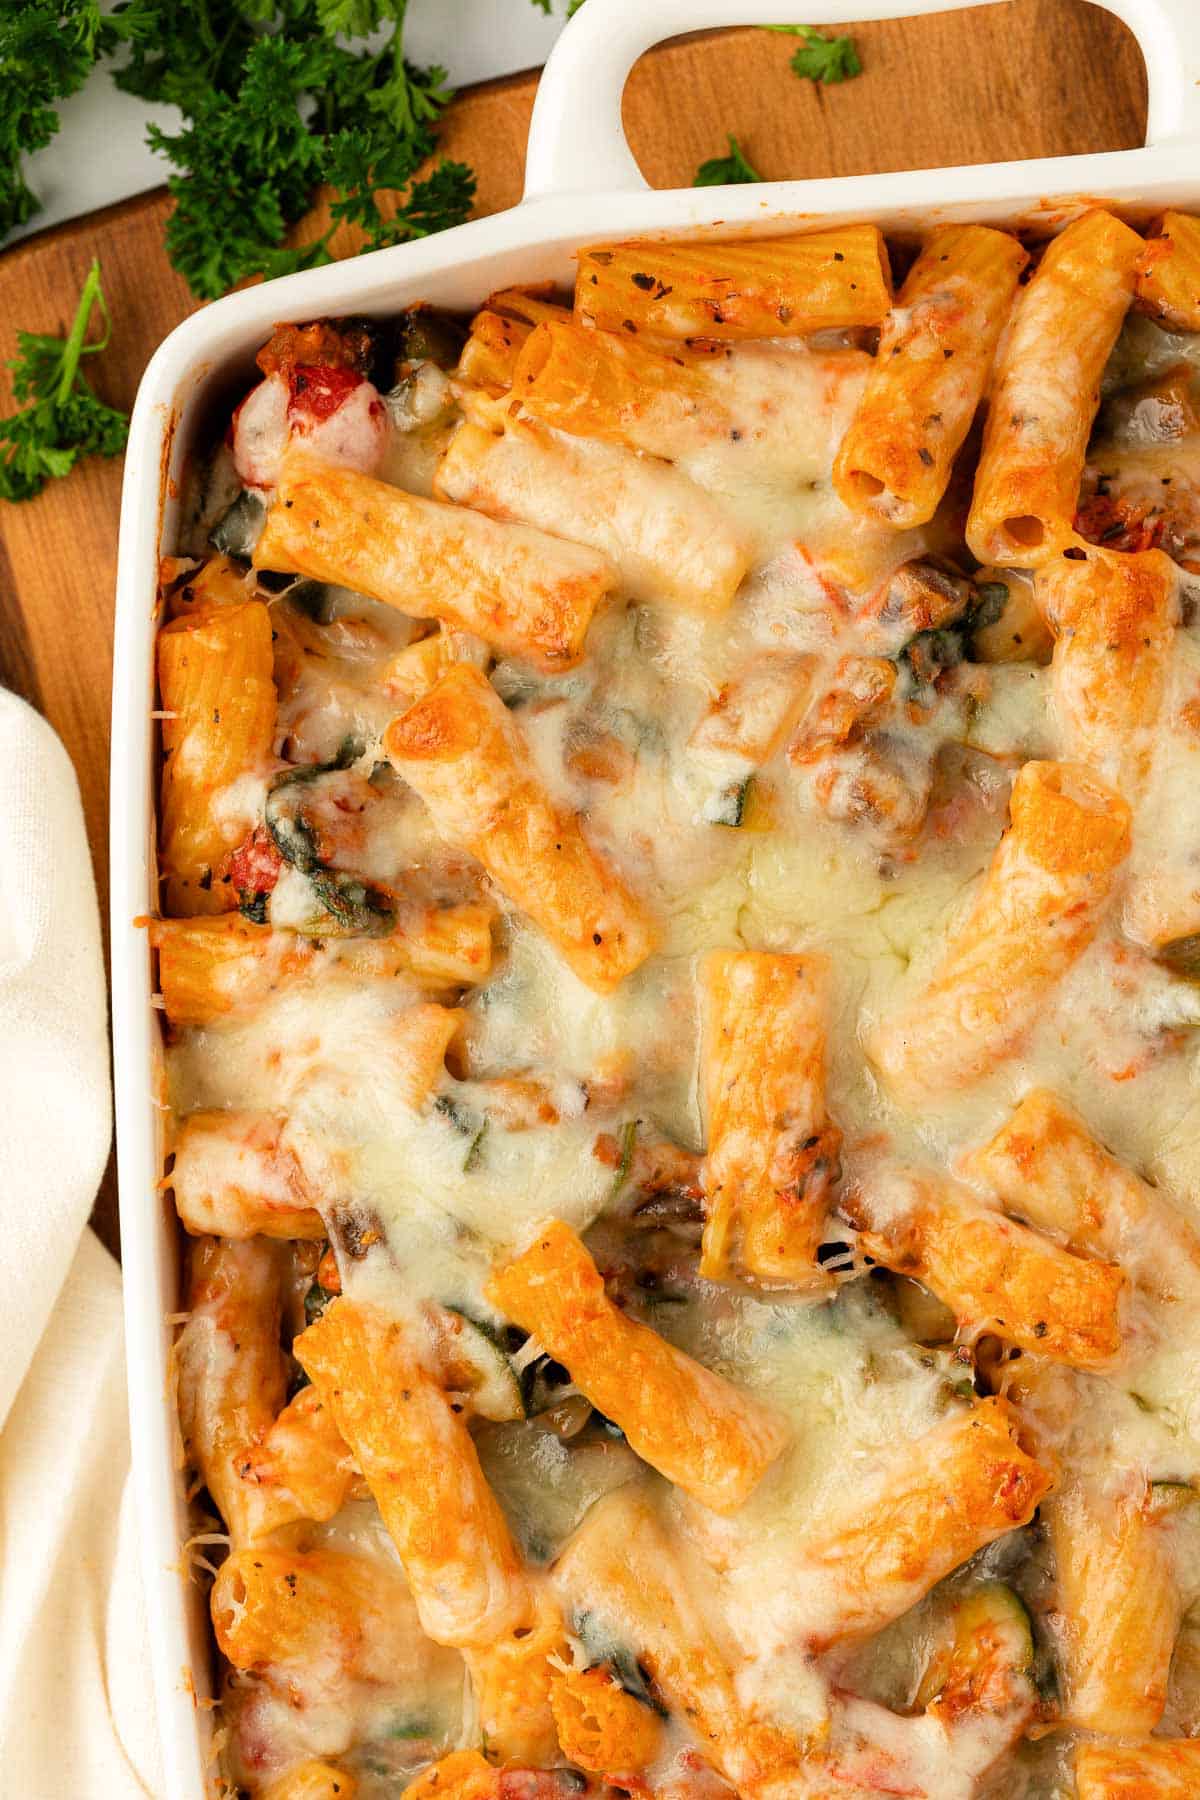 rigatoni noodles with sauce, vegetables, and cheese